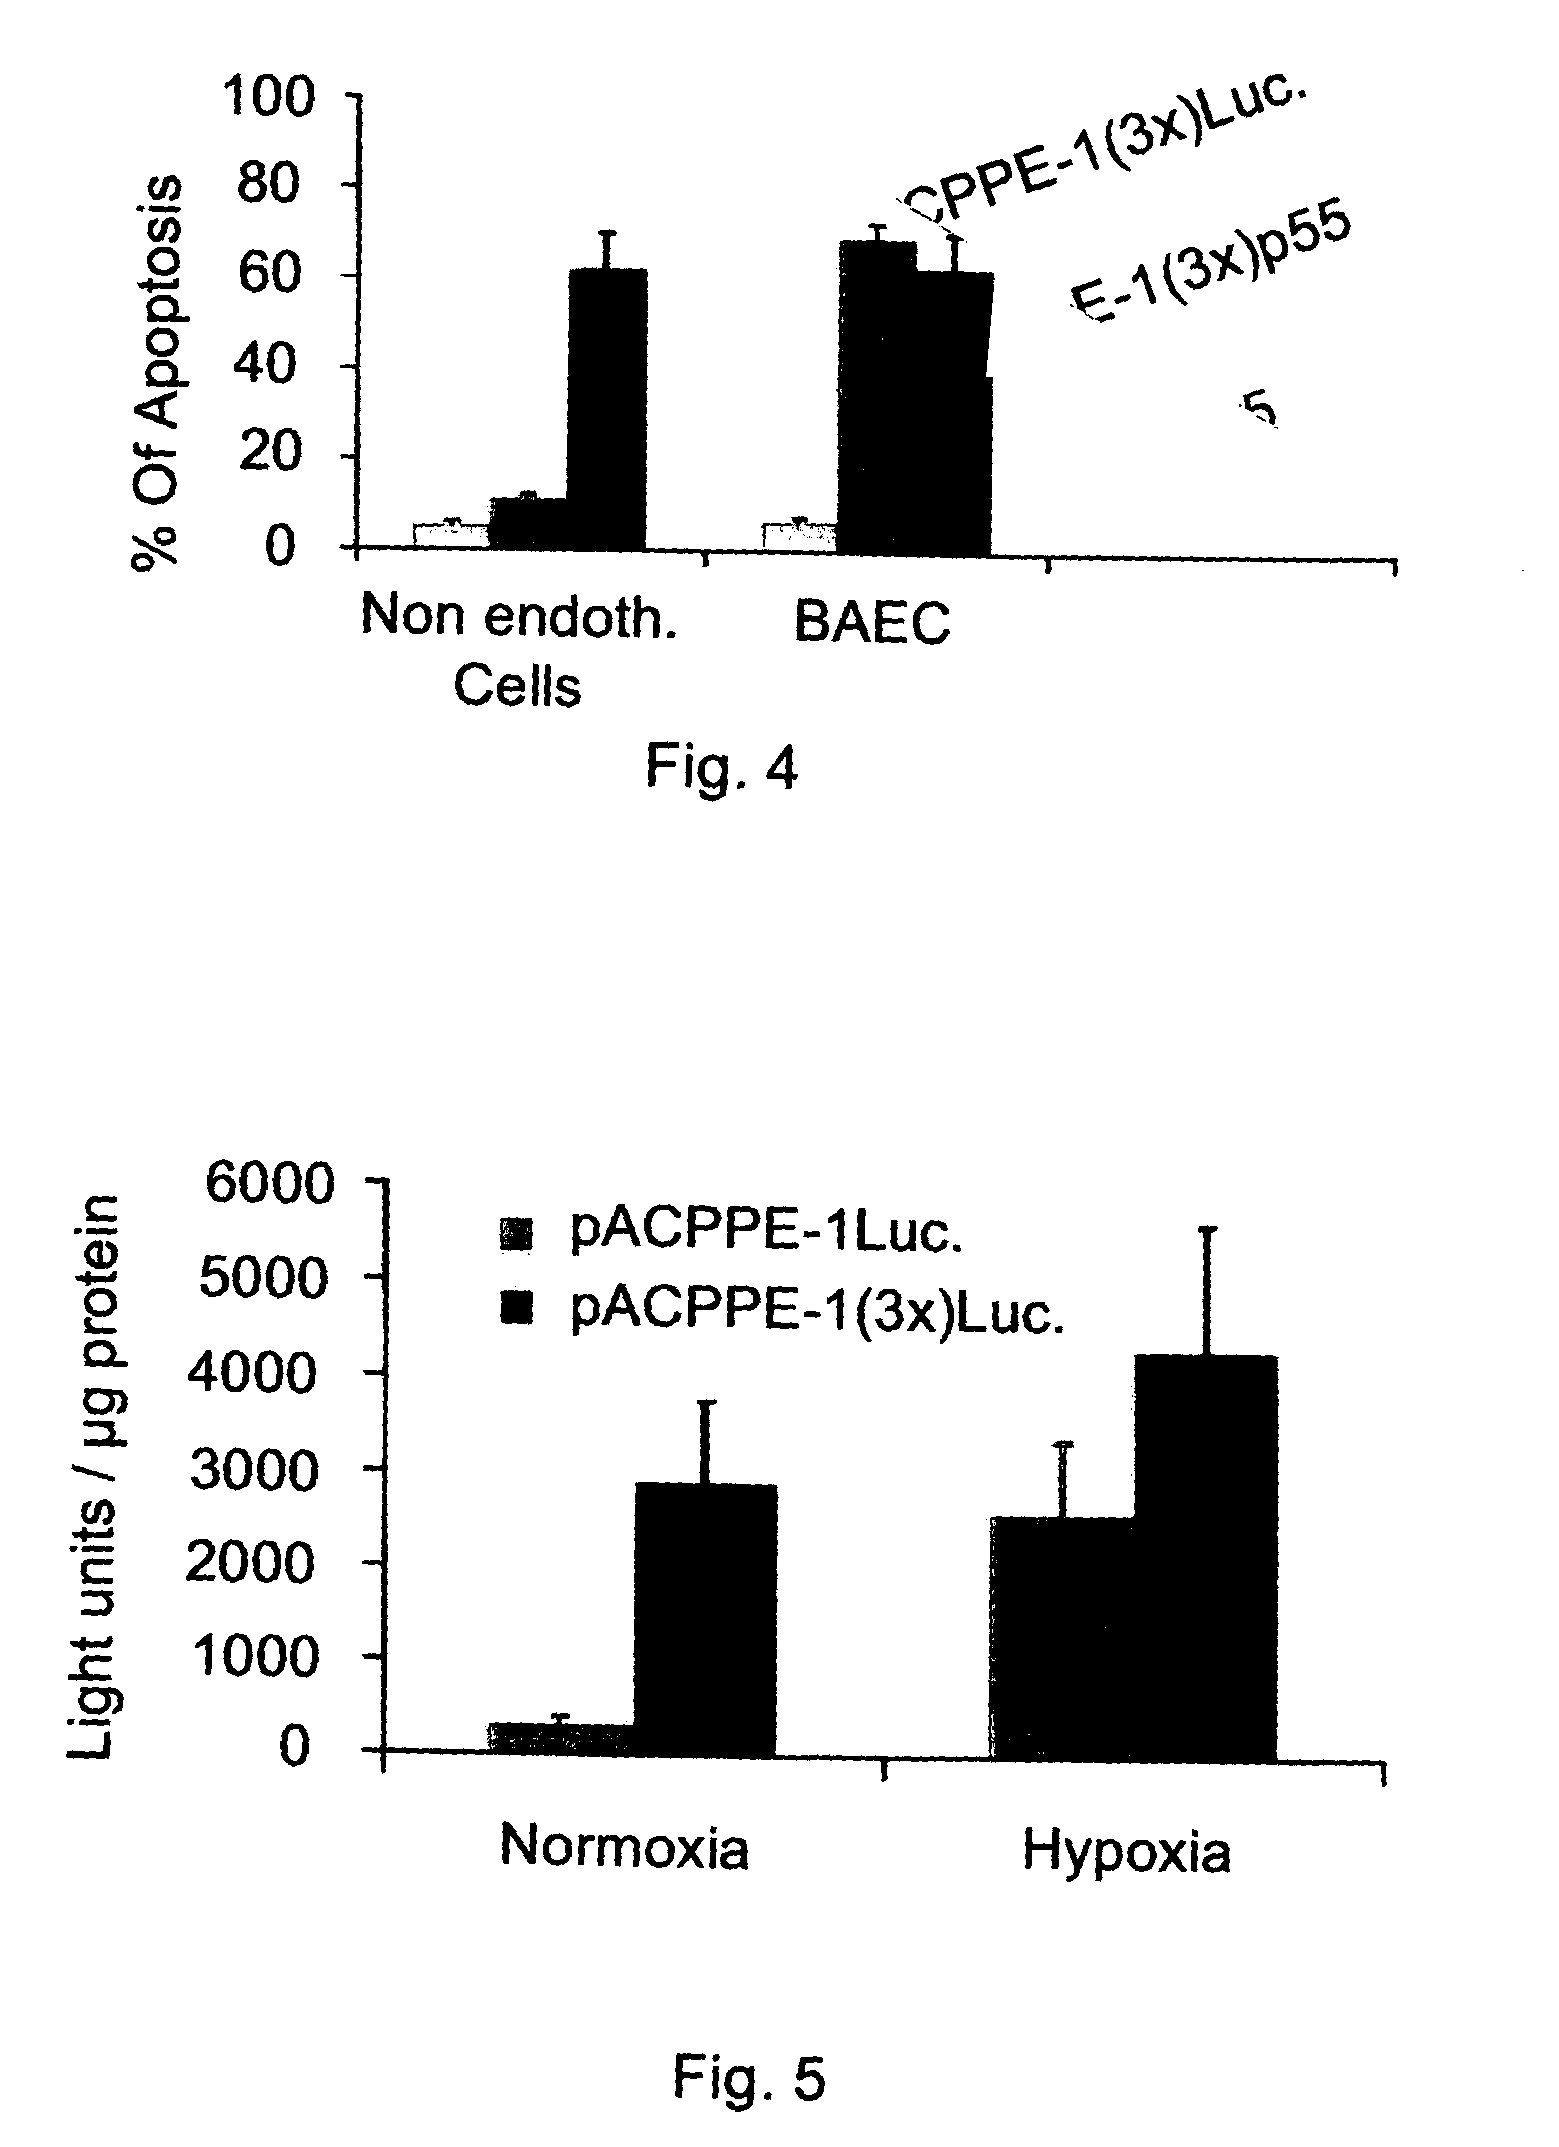 Promoters exhibiting endothelial cell specificity and methods of using same